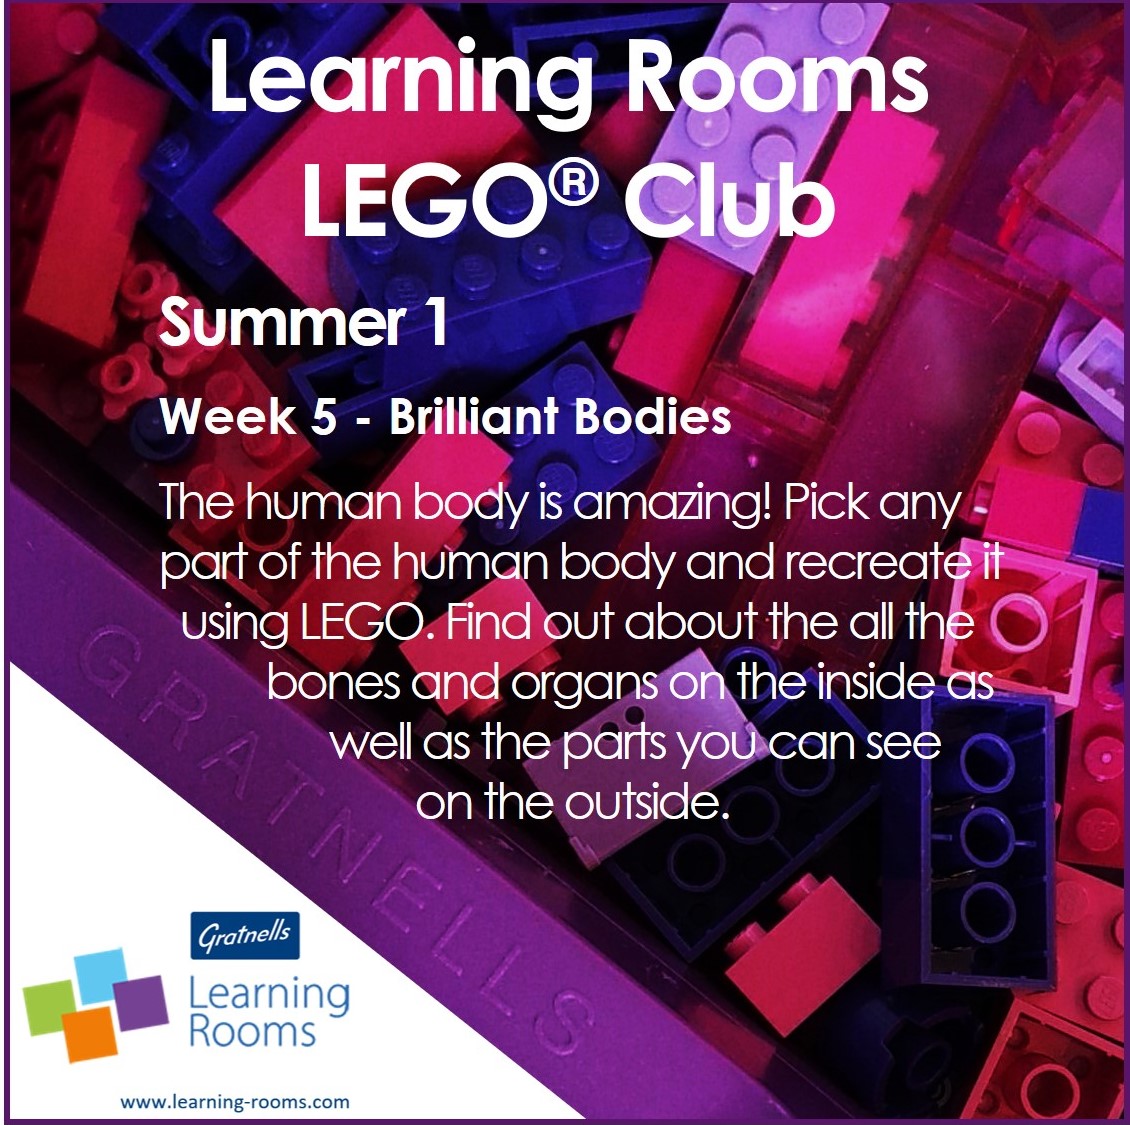 Brilliant Bodies is our new #ExploreLegoClub #LRLegoClub theme. 

To join in, share a picture of your build using the #'s. 

For tips on running your own #LegoClub and for all the summer challenges see learning-rooms.com/learning-rooms…

#STEMambassador #WhatsInMyTray